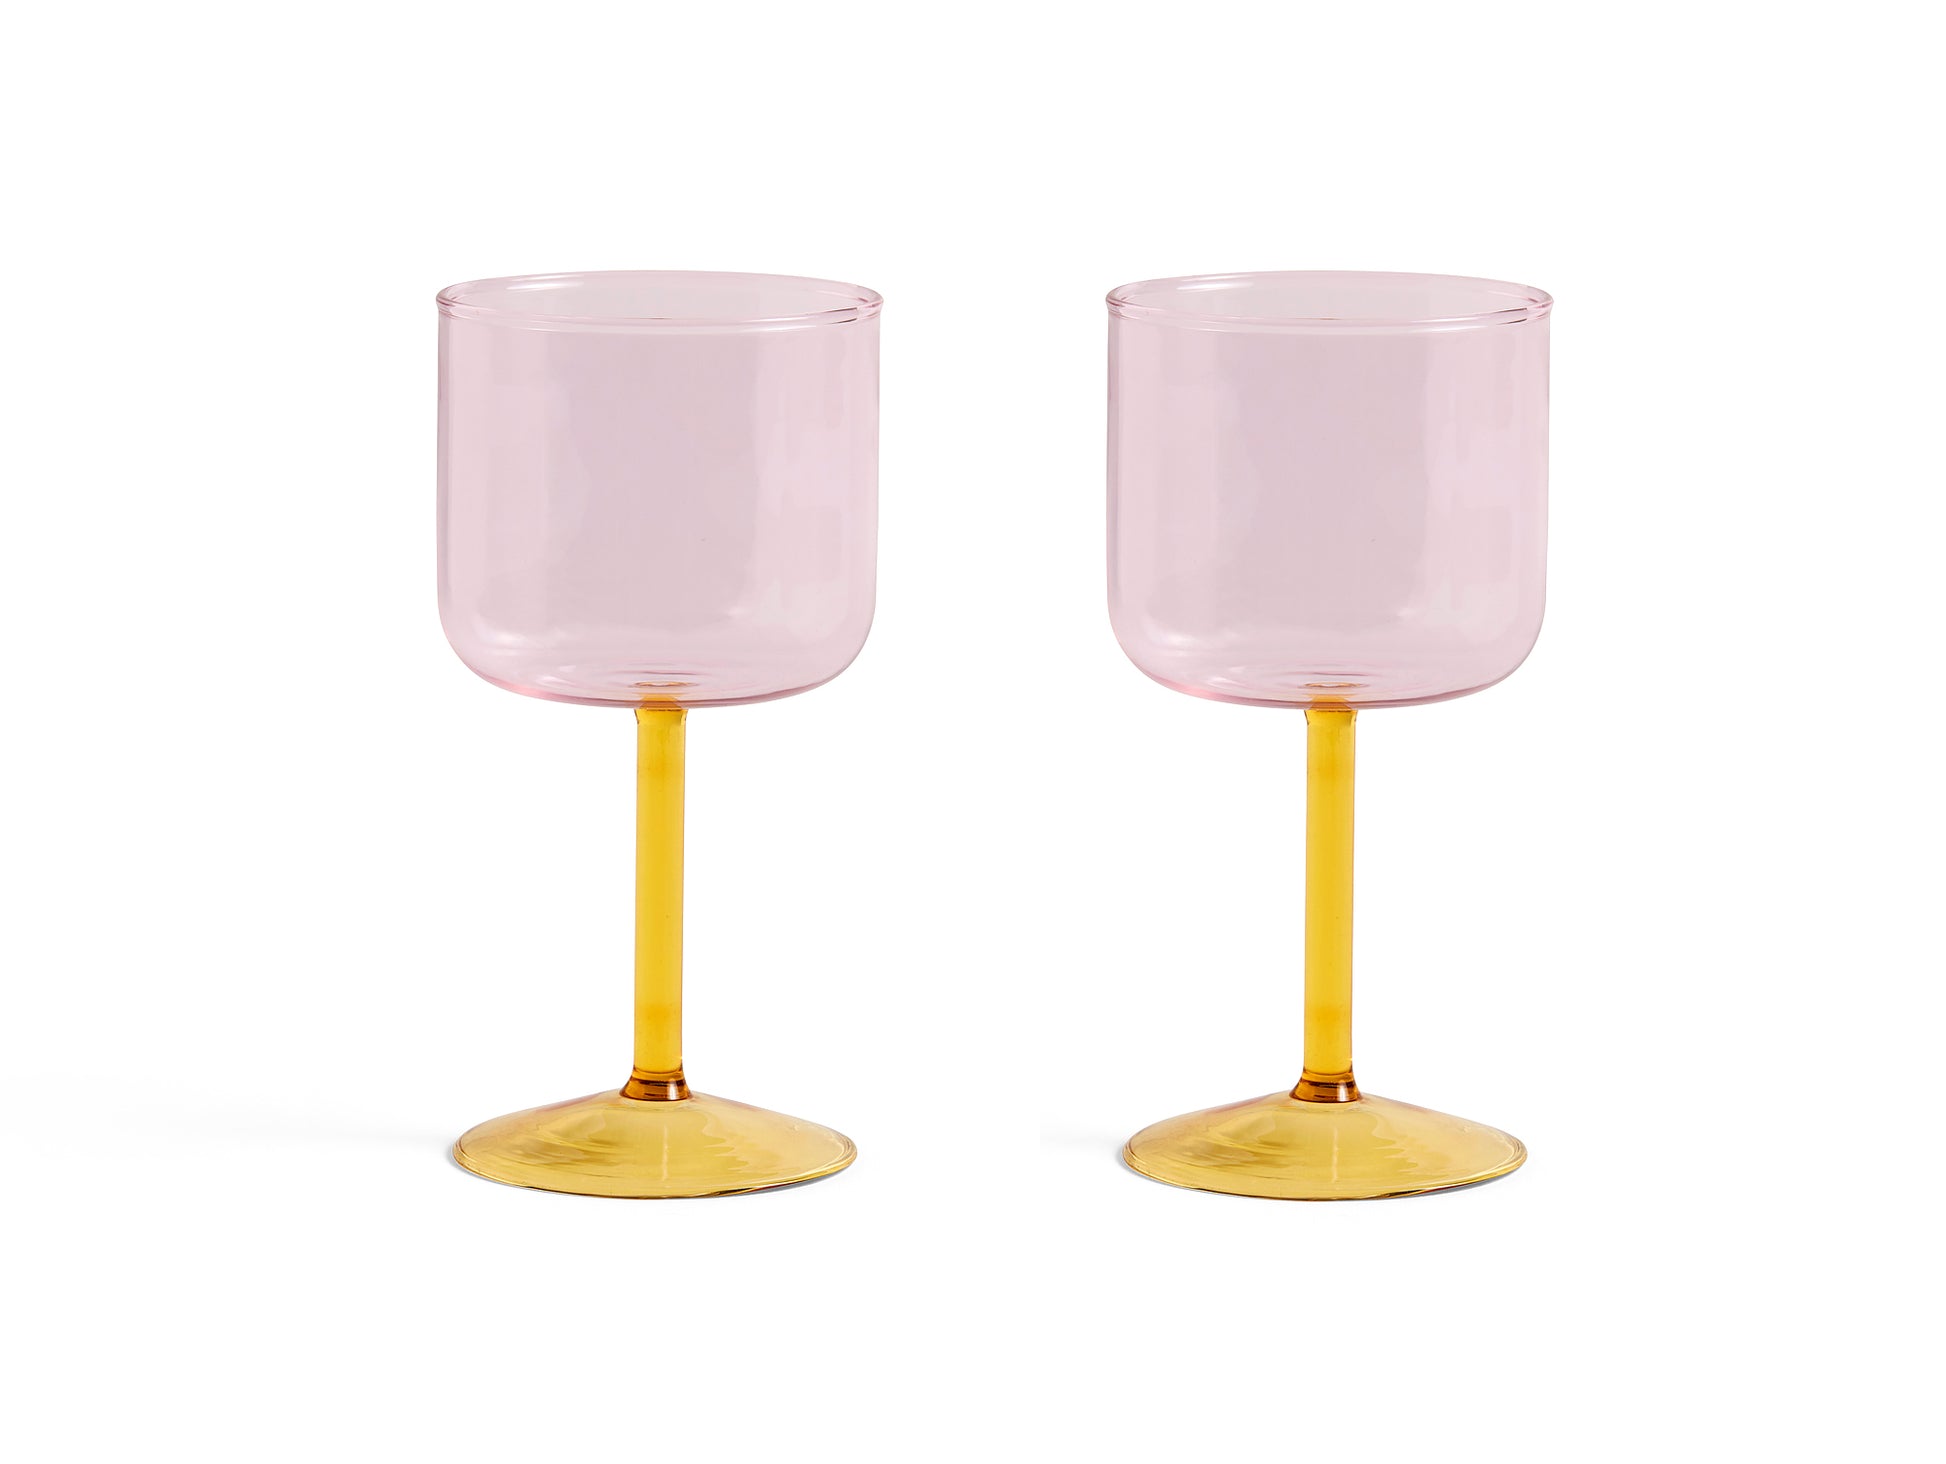 Tint Wine Glasses (Pink and Yellow) - Set of 2 by HAY